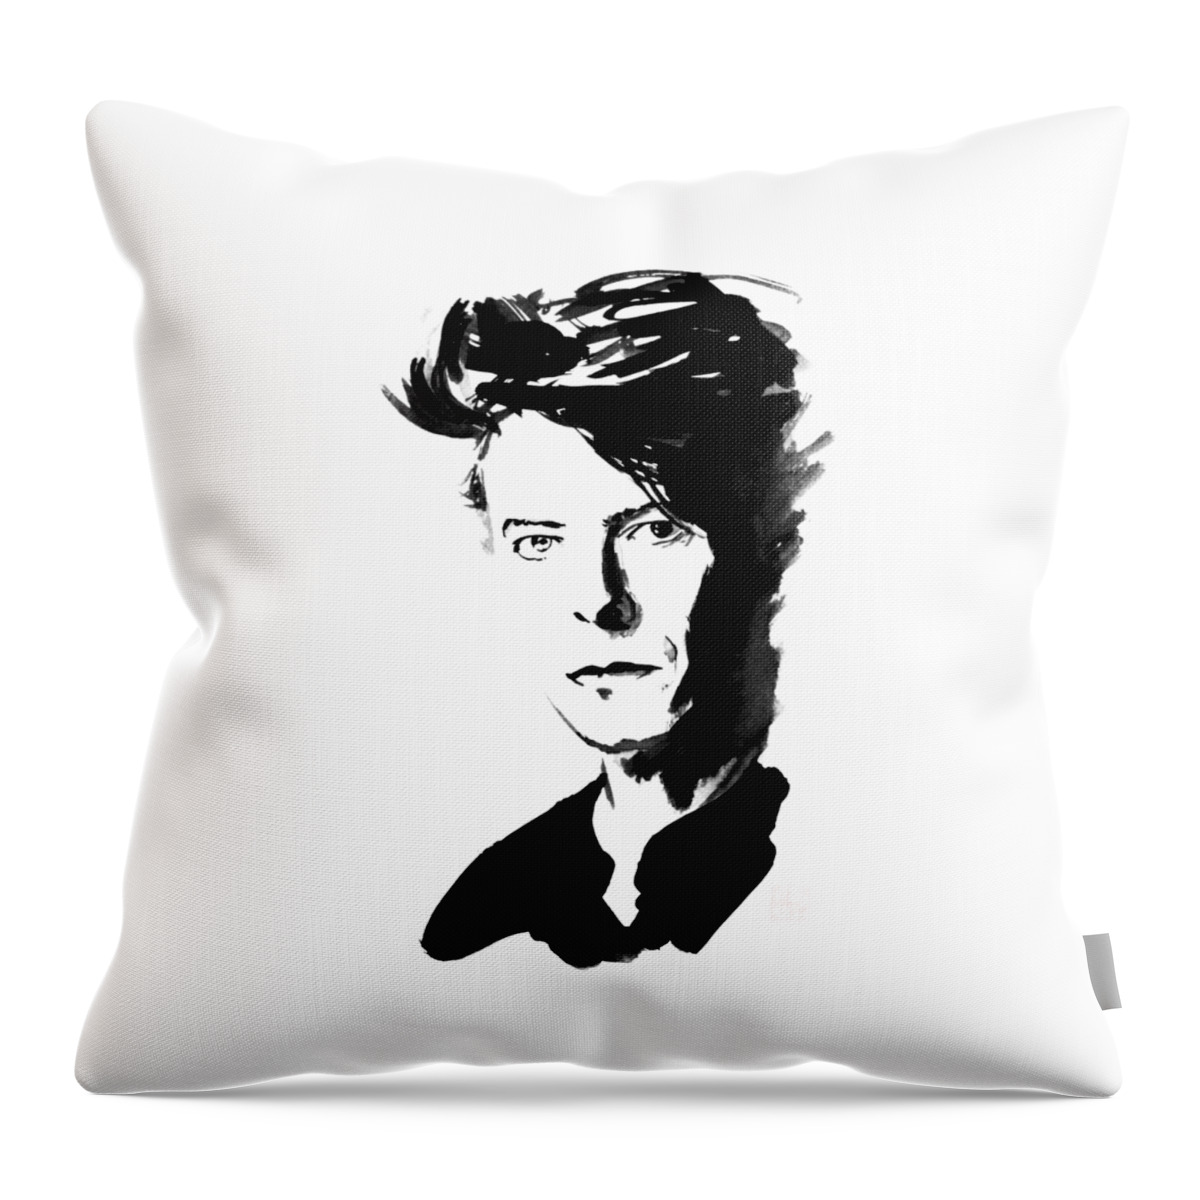 David Bowie Throw Pillow featuring the painting David Bowie by Pechane Sumie